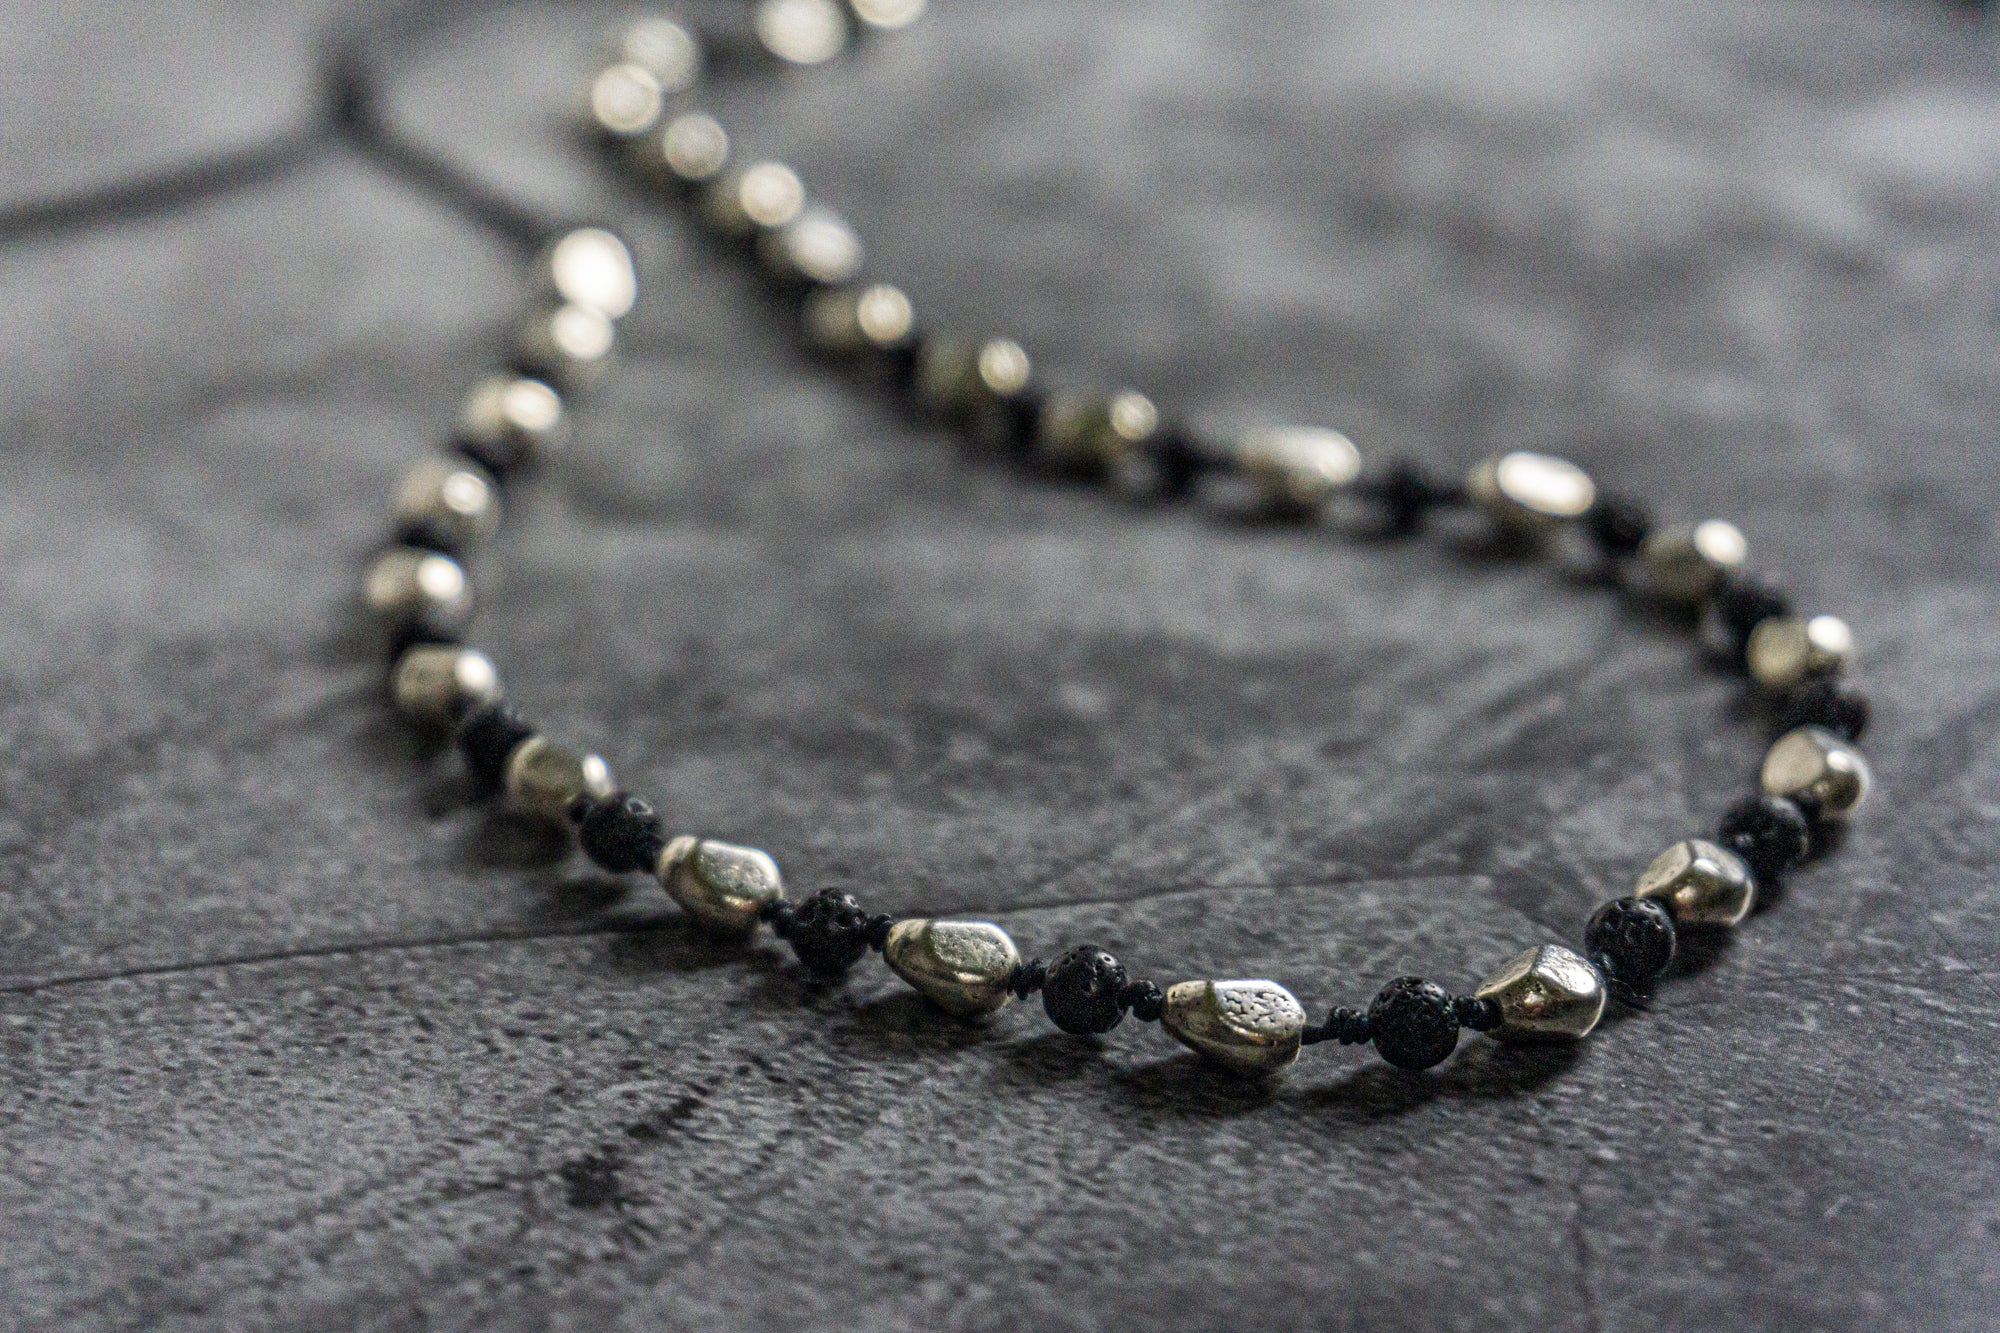 adjustable necklace made of silver nuggets and black lava stone beads- wander jewellery